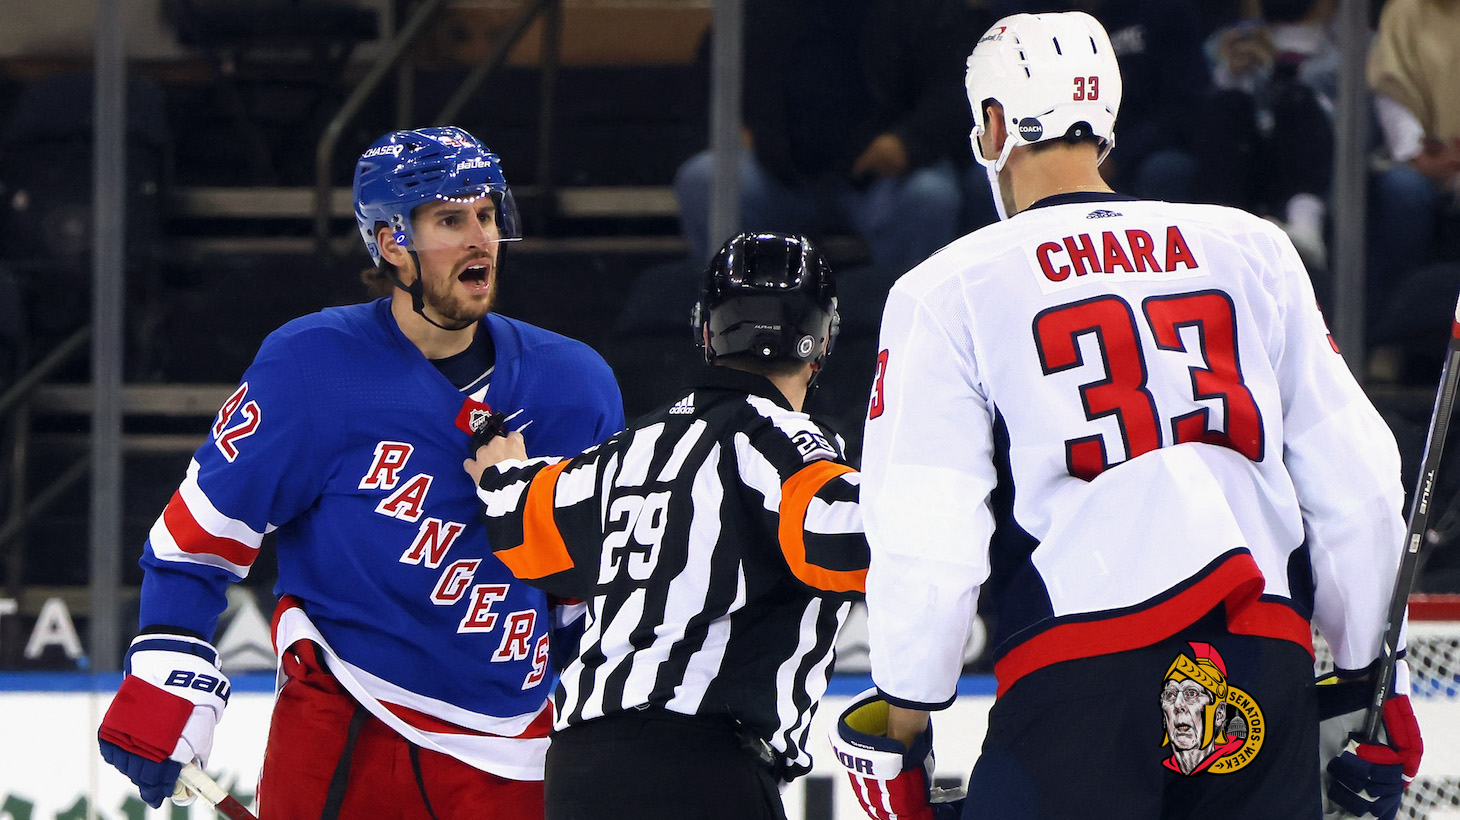 Tom Wilson incident leads to many fights between Rangers and Capitals